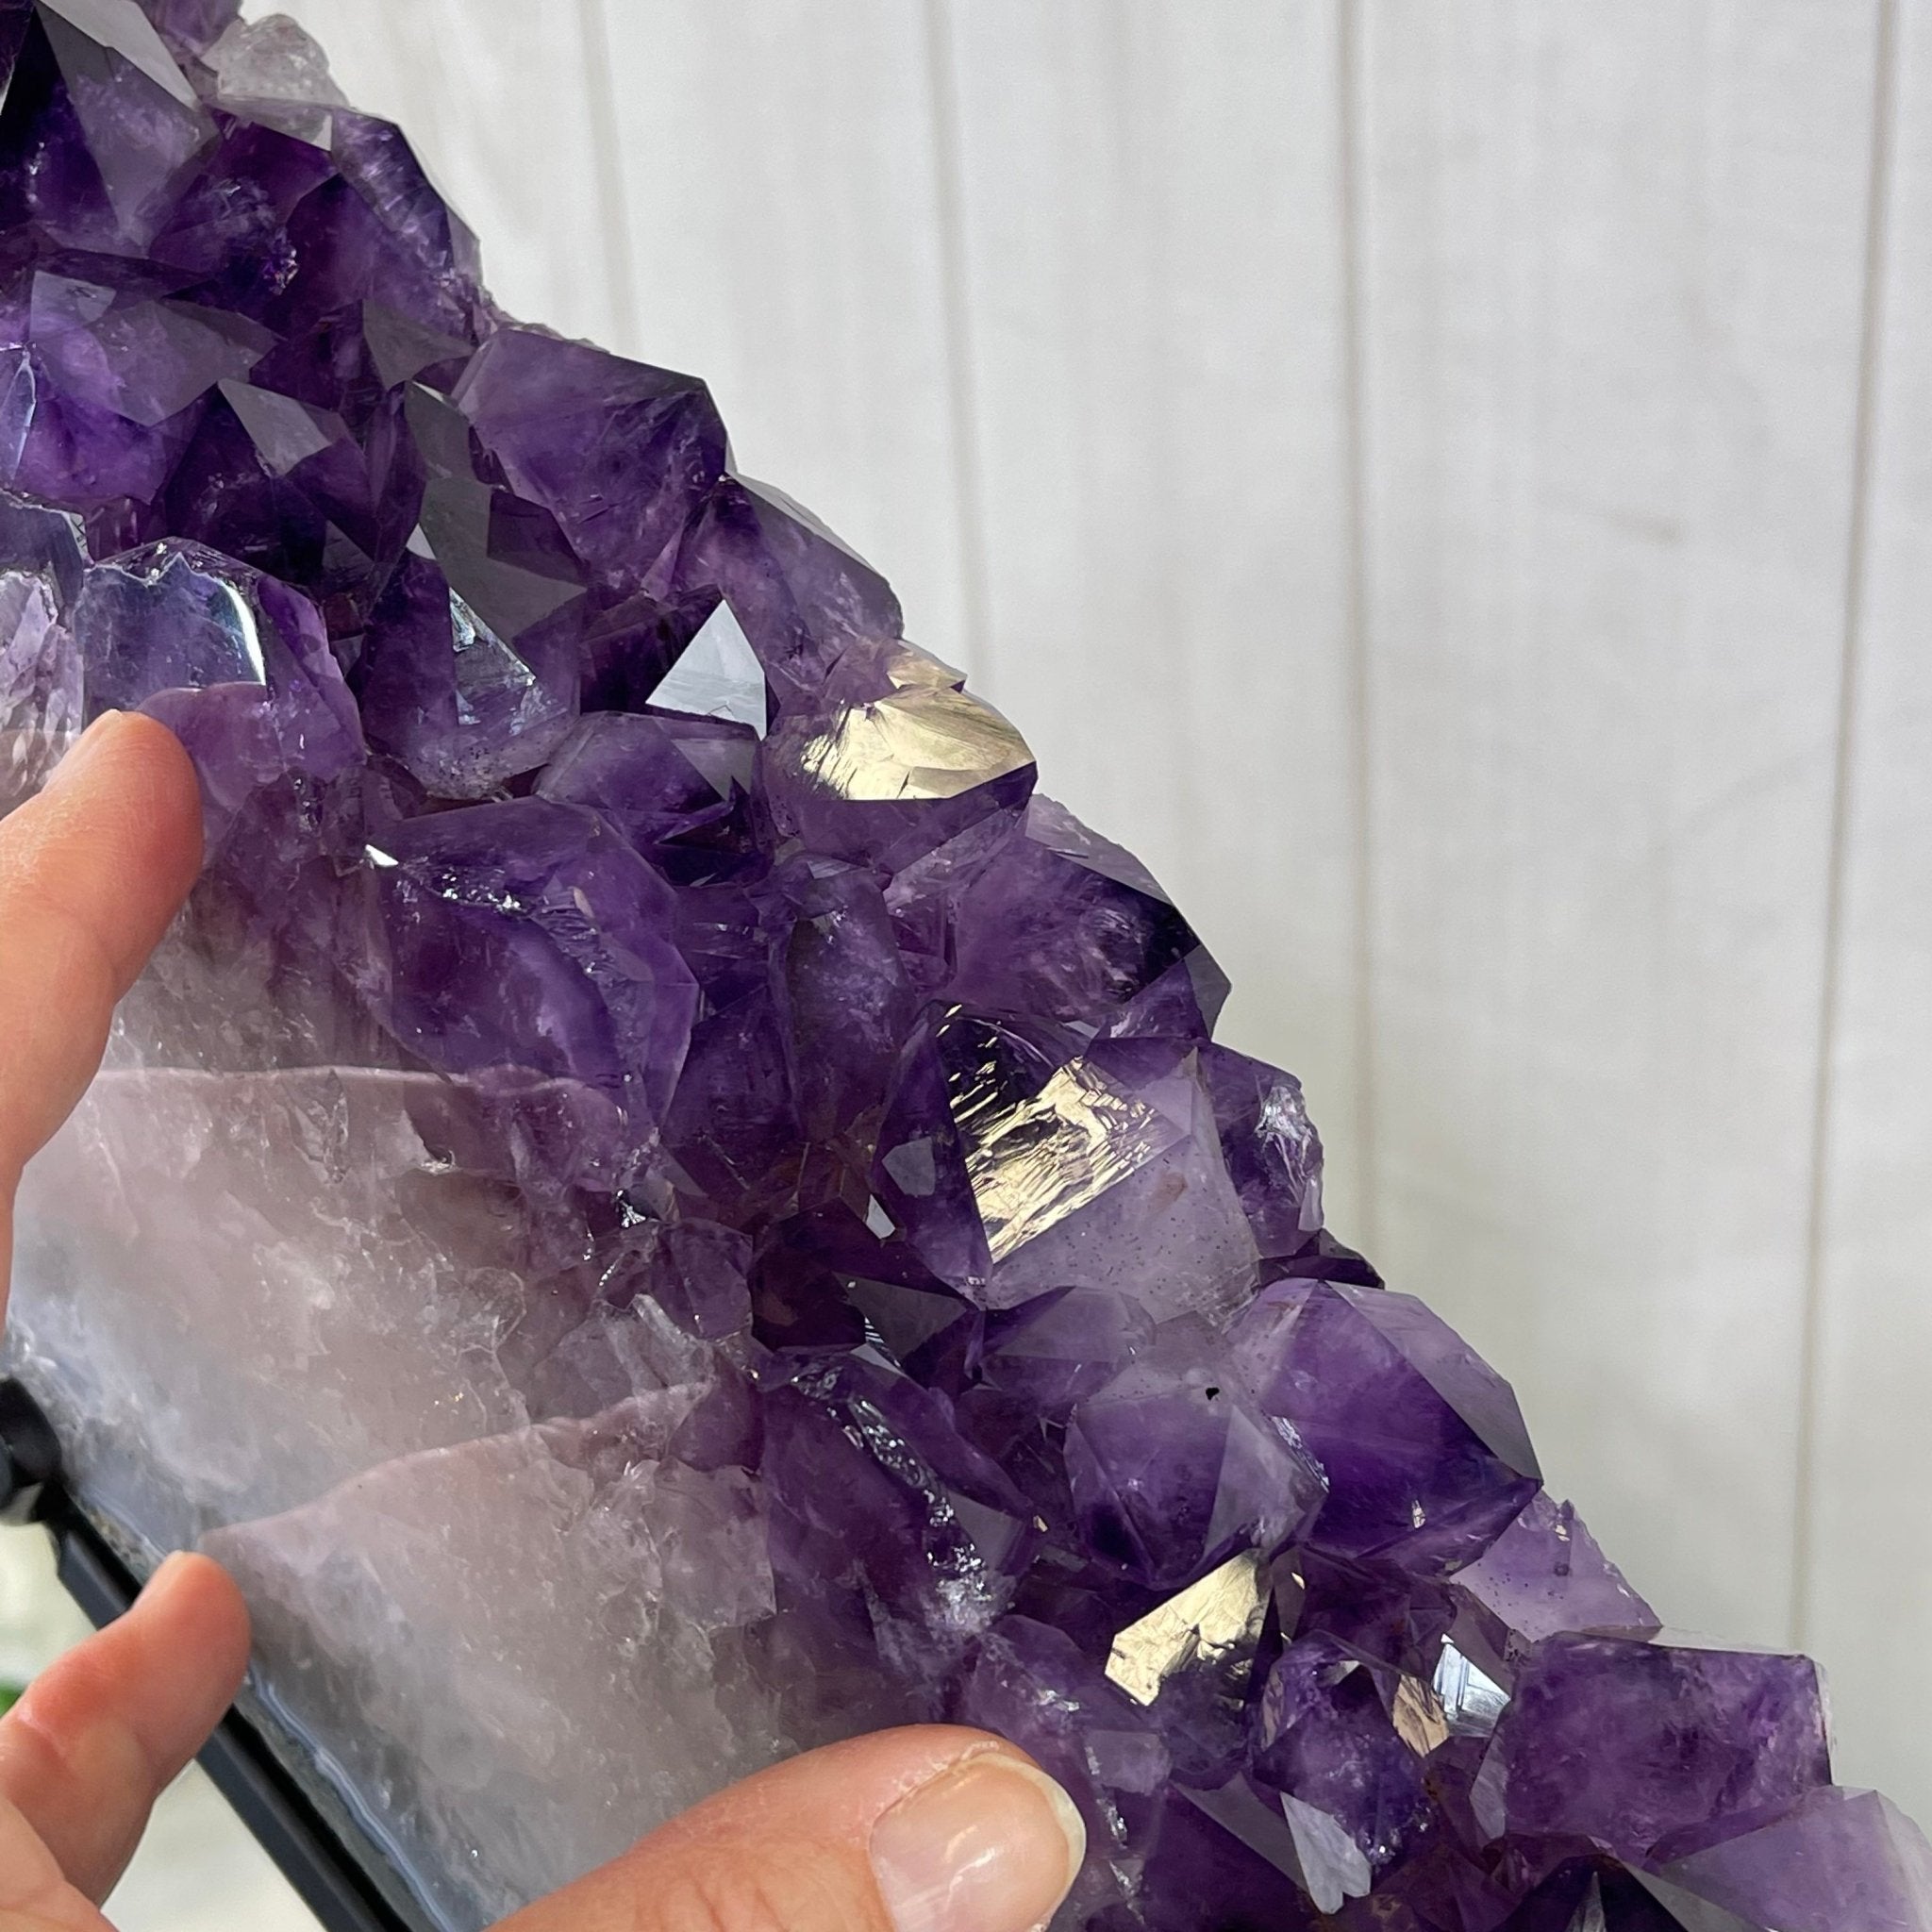 Super Quality Brazilian Amethyst Crystal Portal on a Tall Rotating Stand, 66.8 lbs & 61.9" tall Model #5604-0106 by Brazil Gems - Brazil GemsBrazil GemsSuper Quality Brazilian Amethyst Crystal Portal on a Tall Rotating Stand, 66.8 lbs & 61.9" tall Model #5604-0106 by Brazil GemsPortals on Rotating Bases5604-0106